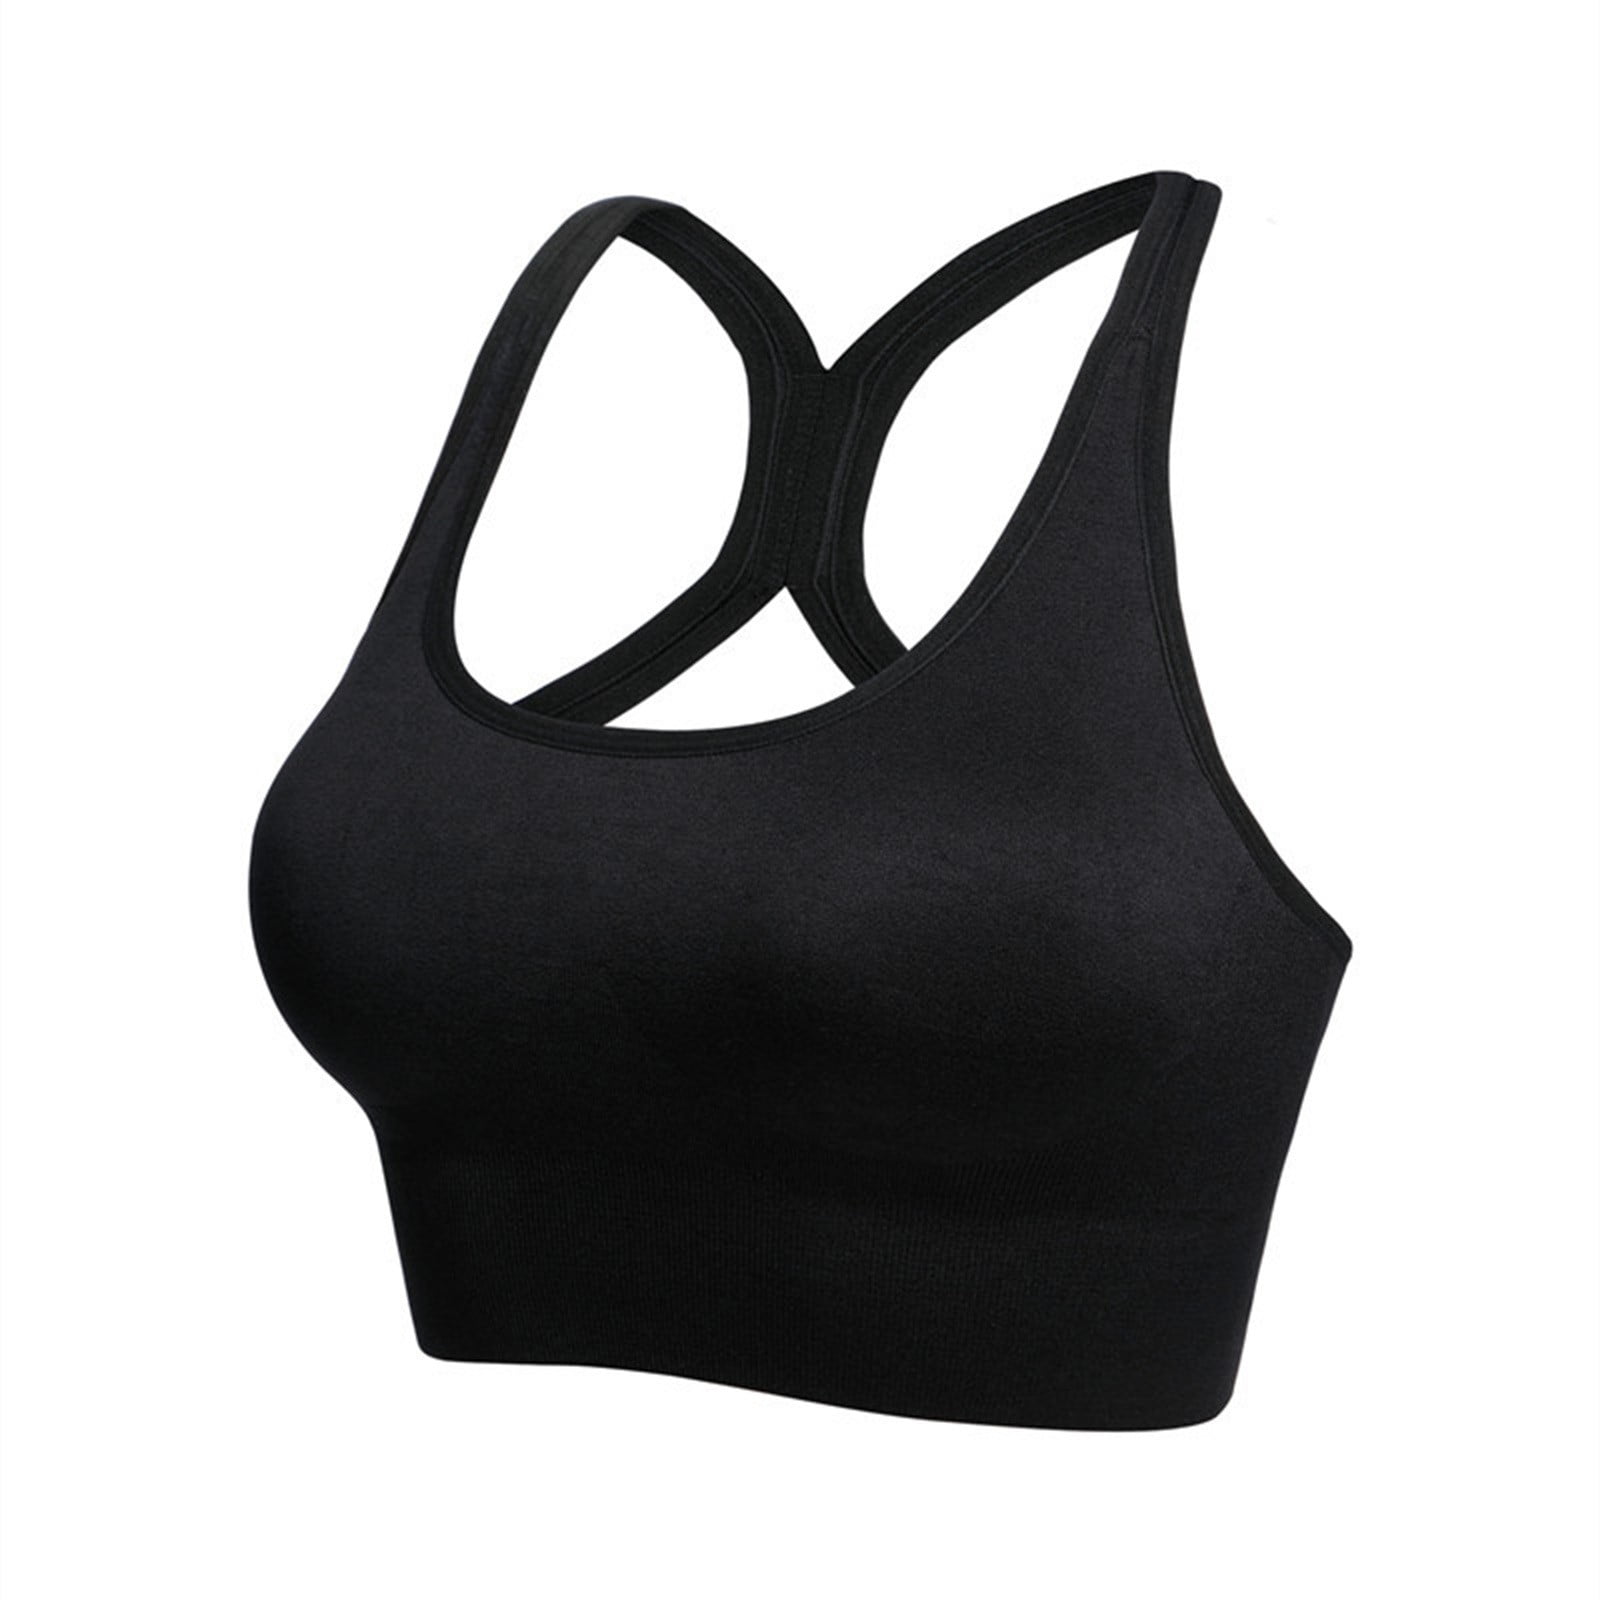 Women's Sports Bra Proof With Large Boobs And Beautiful Back